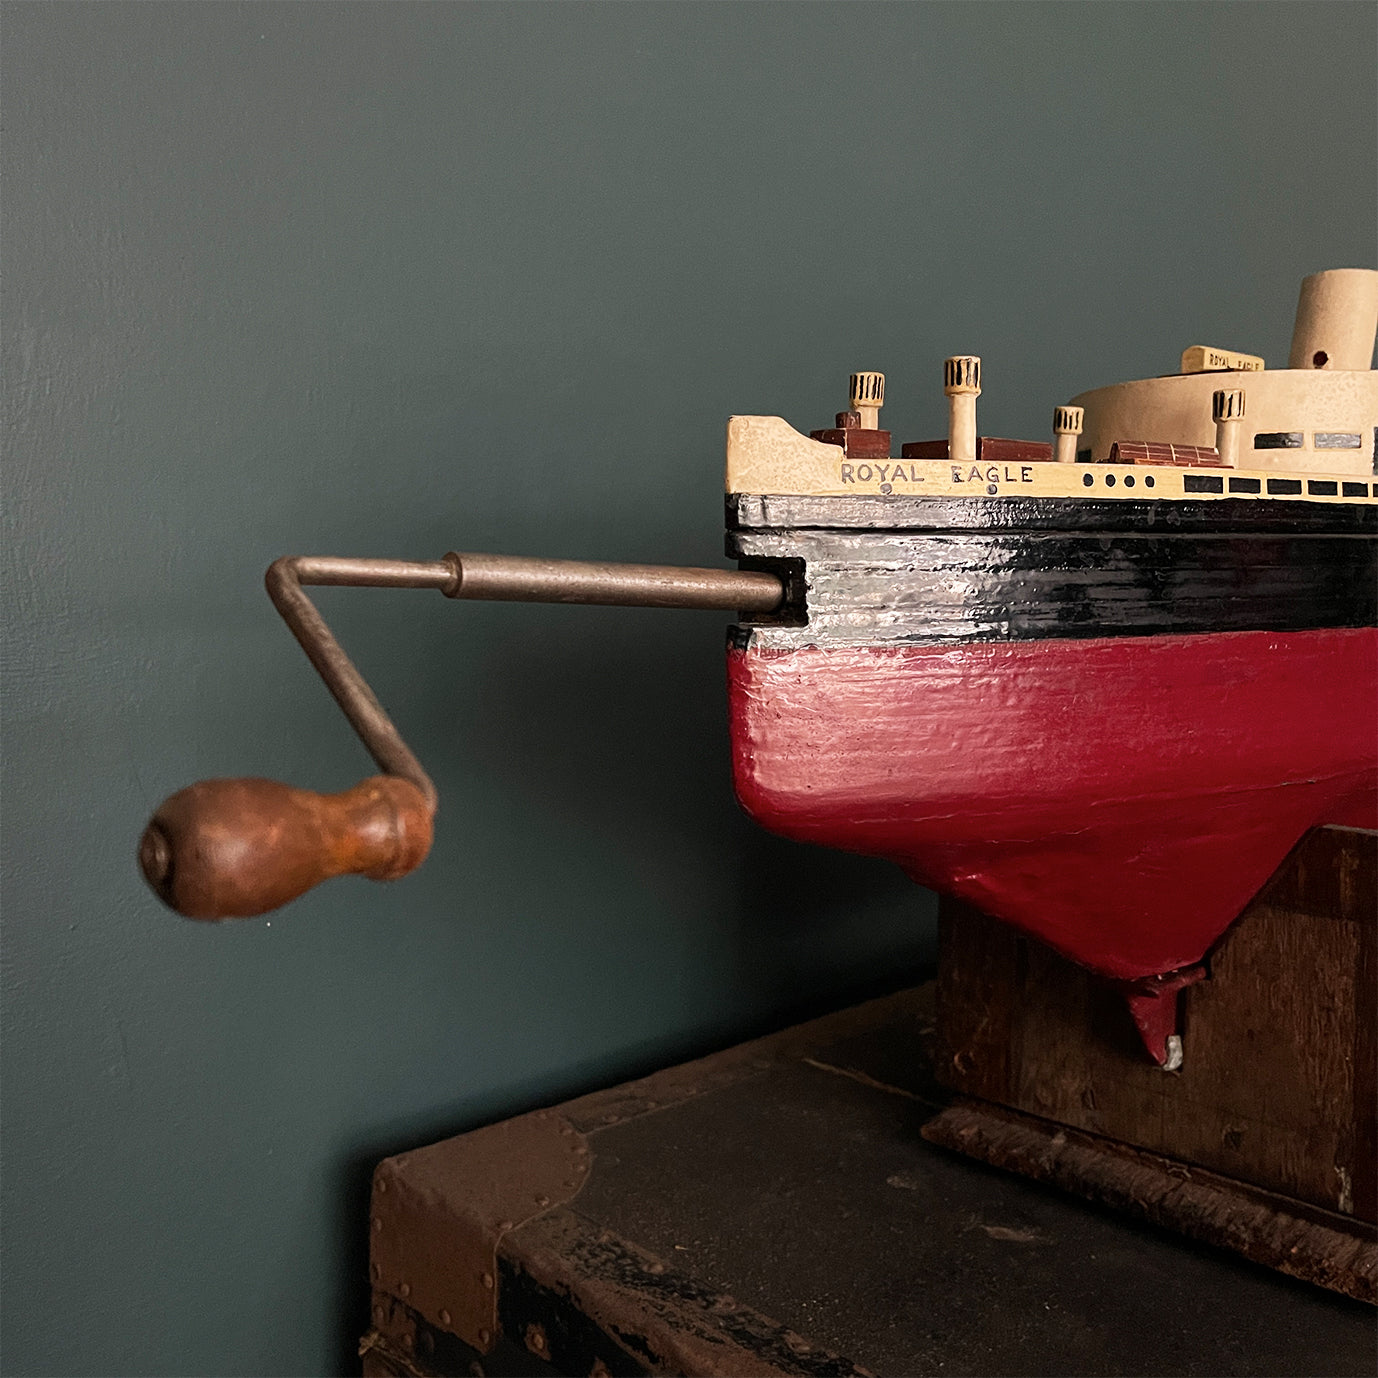 A wonderful large naive scratch built model of The Royal Eagle steam ship with an internal clockwork mechanism that drives the paddles. Comes with its original winder and handle that you clip on to make it easier to carry - SHOP NOW - www.intovintage.co.uk